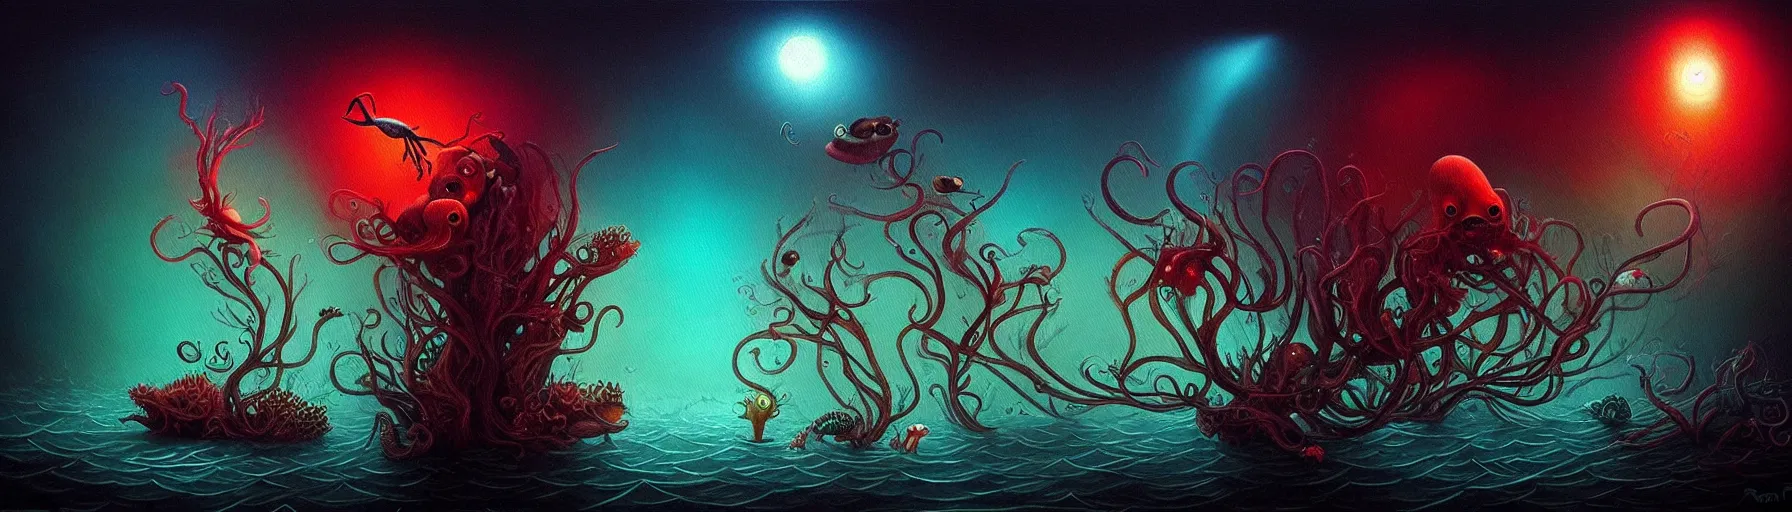 Image similar to whimsical strange small sea creatures from the depths of the imaginal realm, dark eerie dramatic lighting, detailed and atmospheric surreal darkly colorful painting by ronny khalil